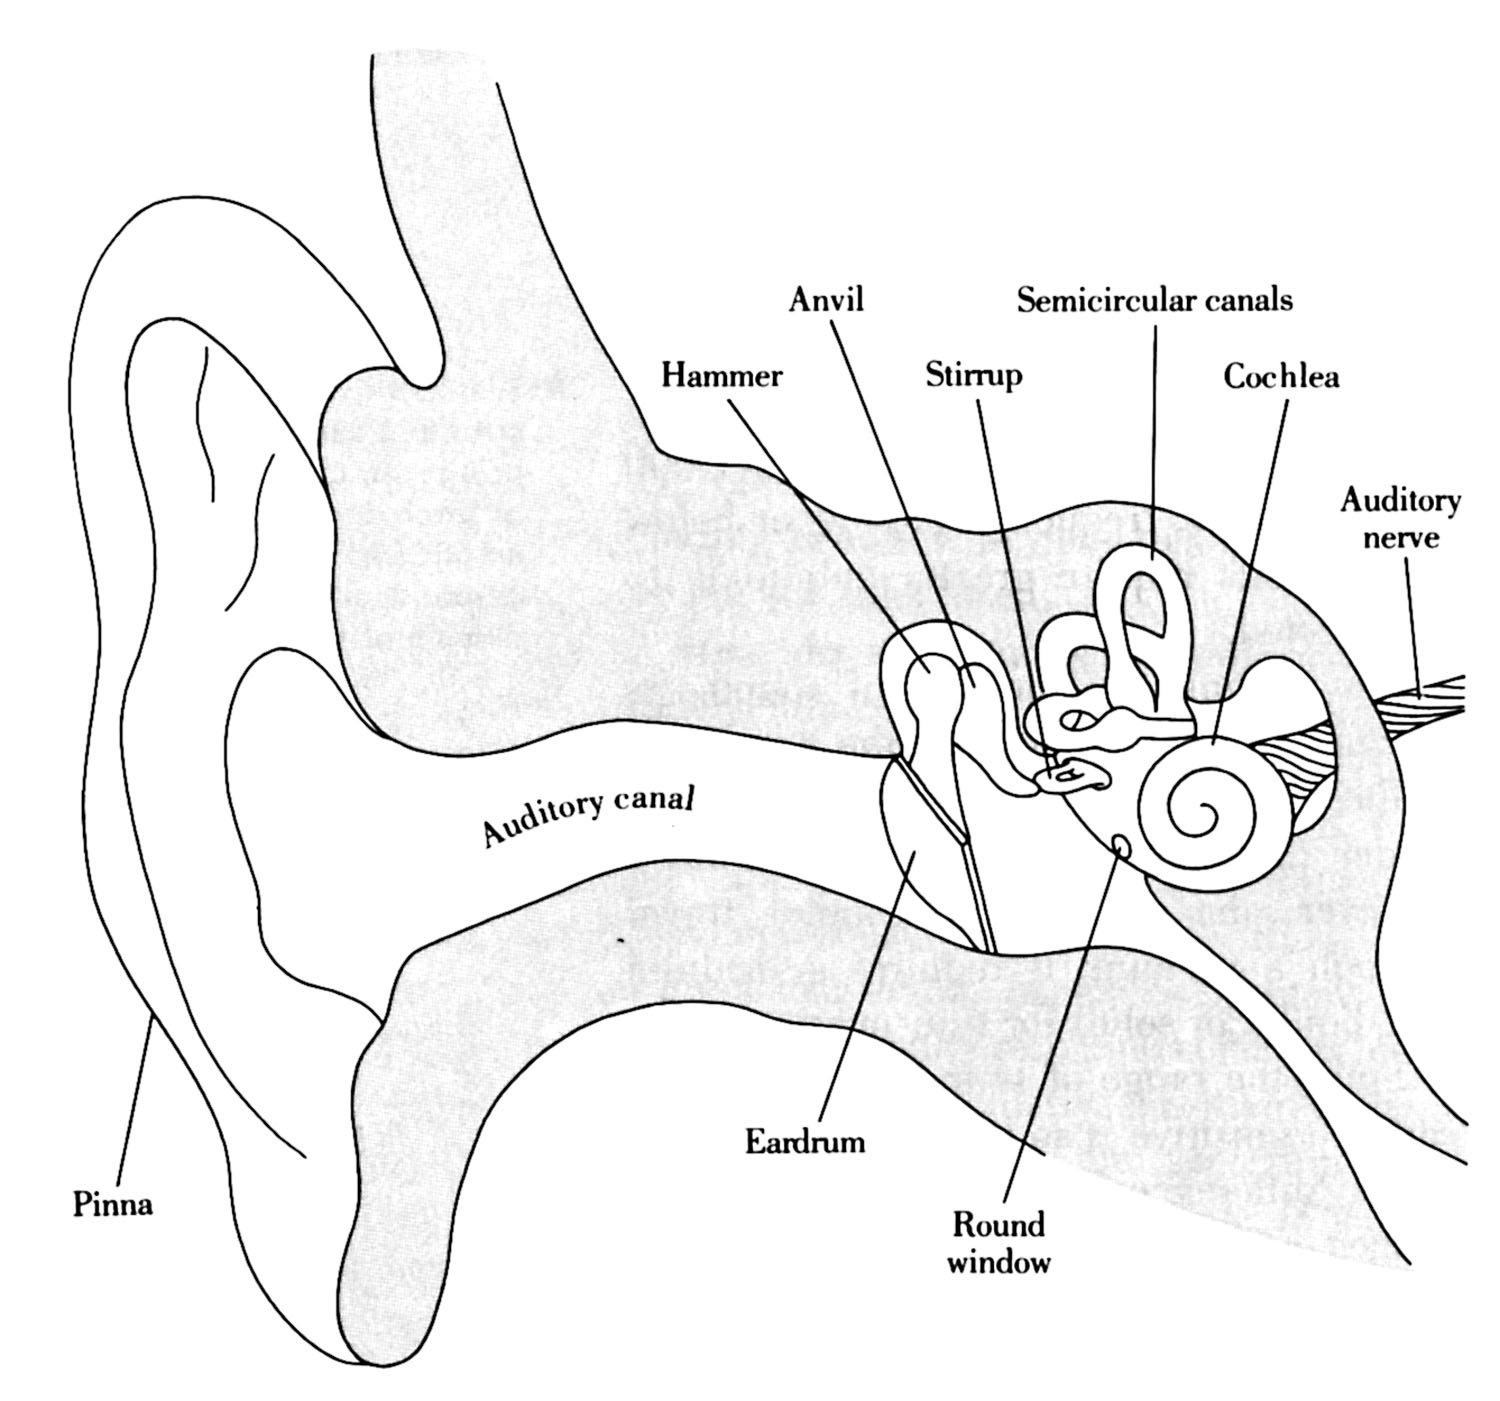 functional anatomy of the ear practice questions